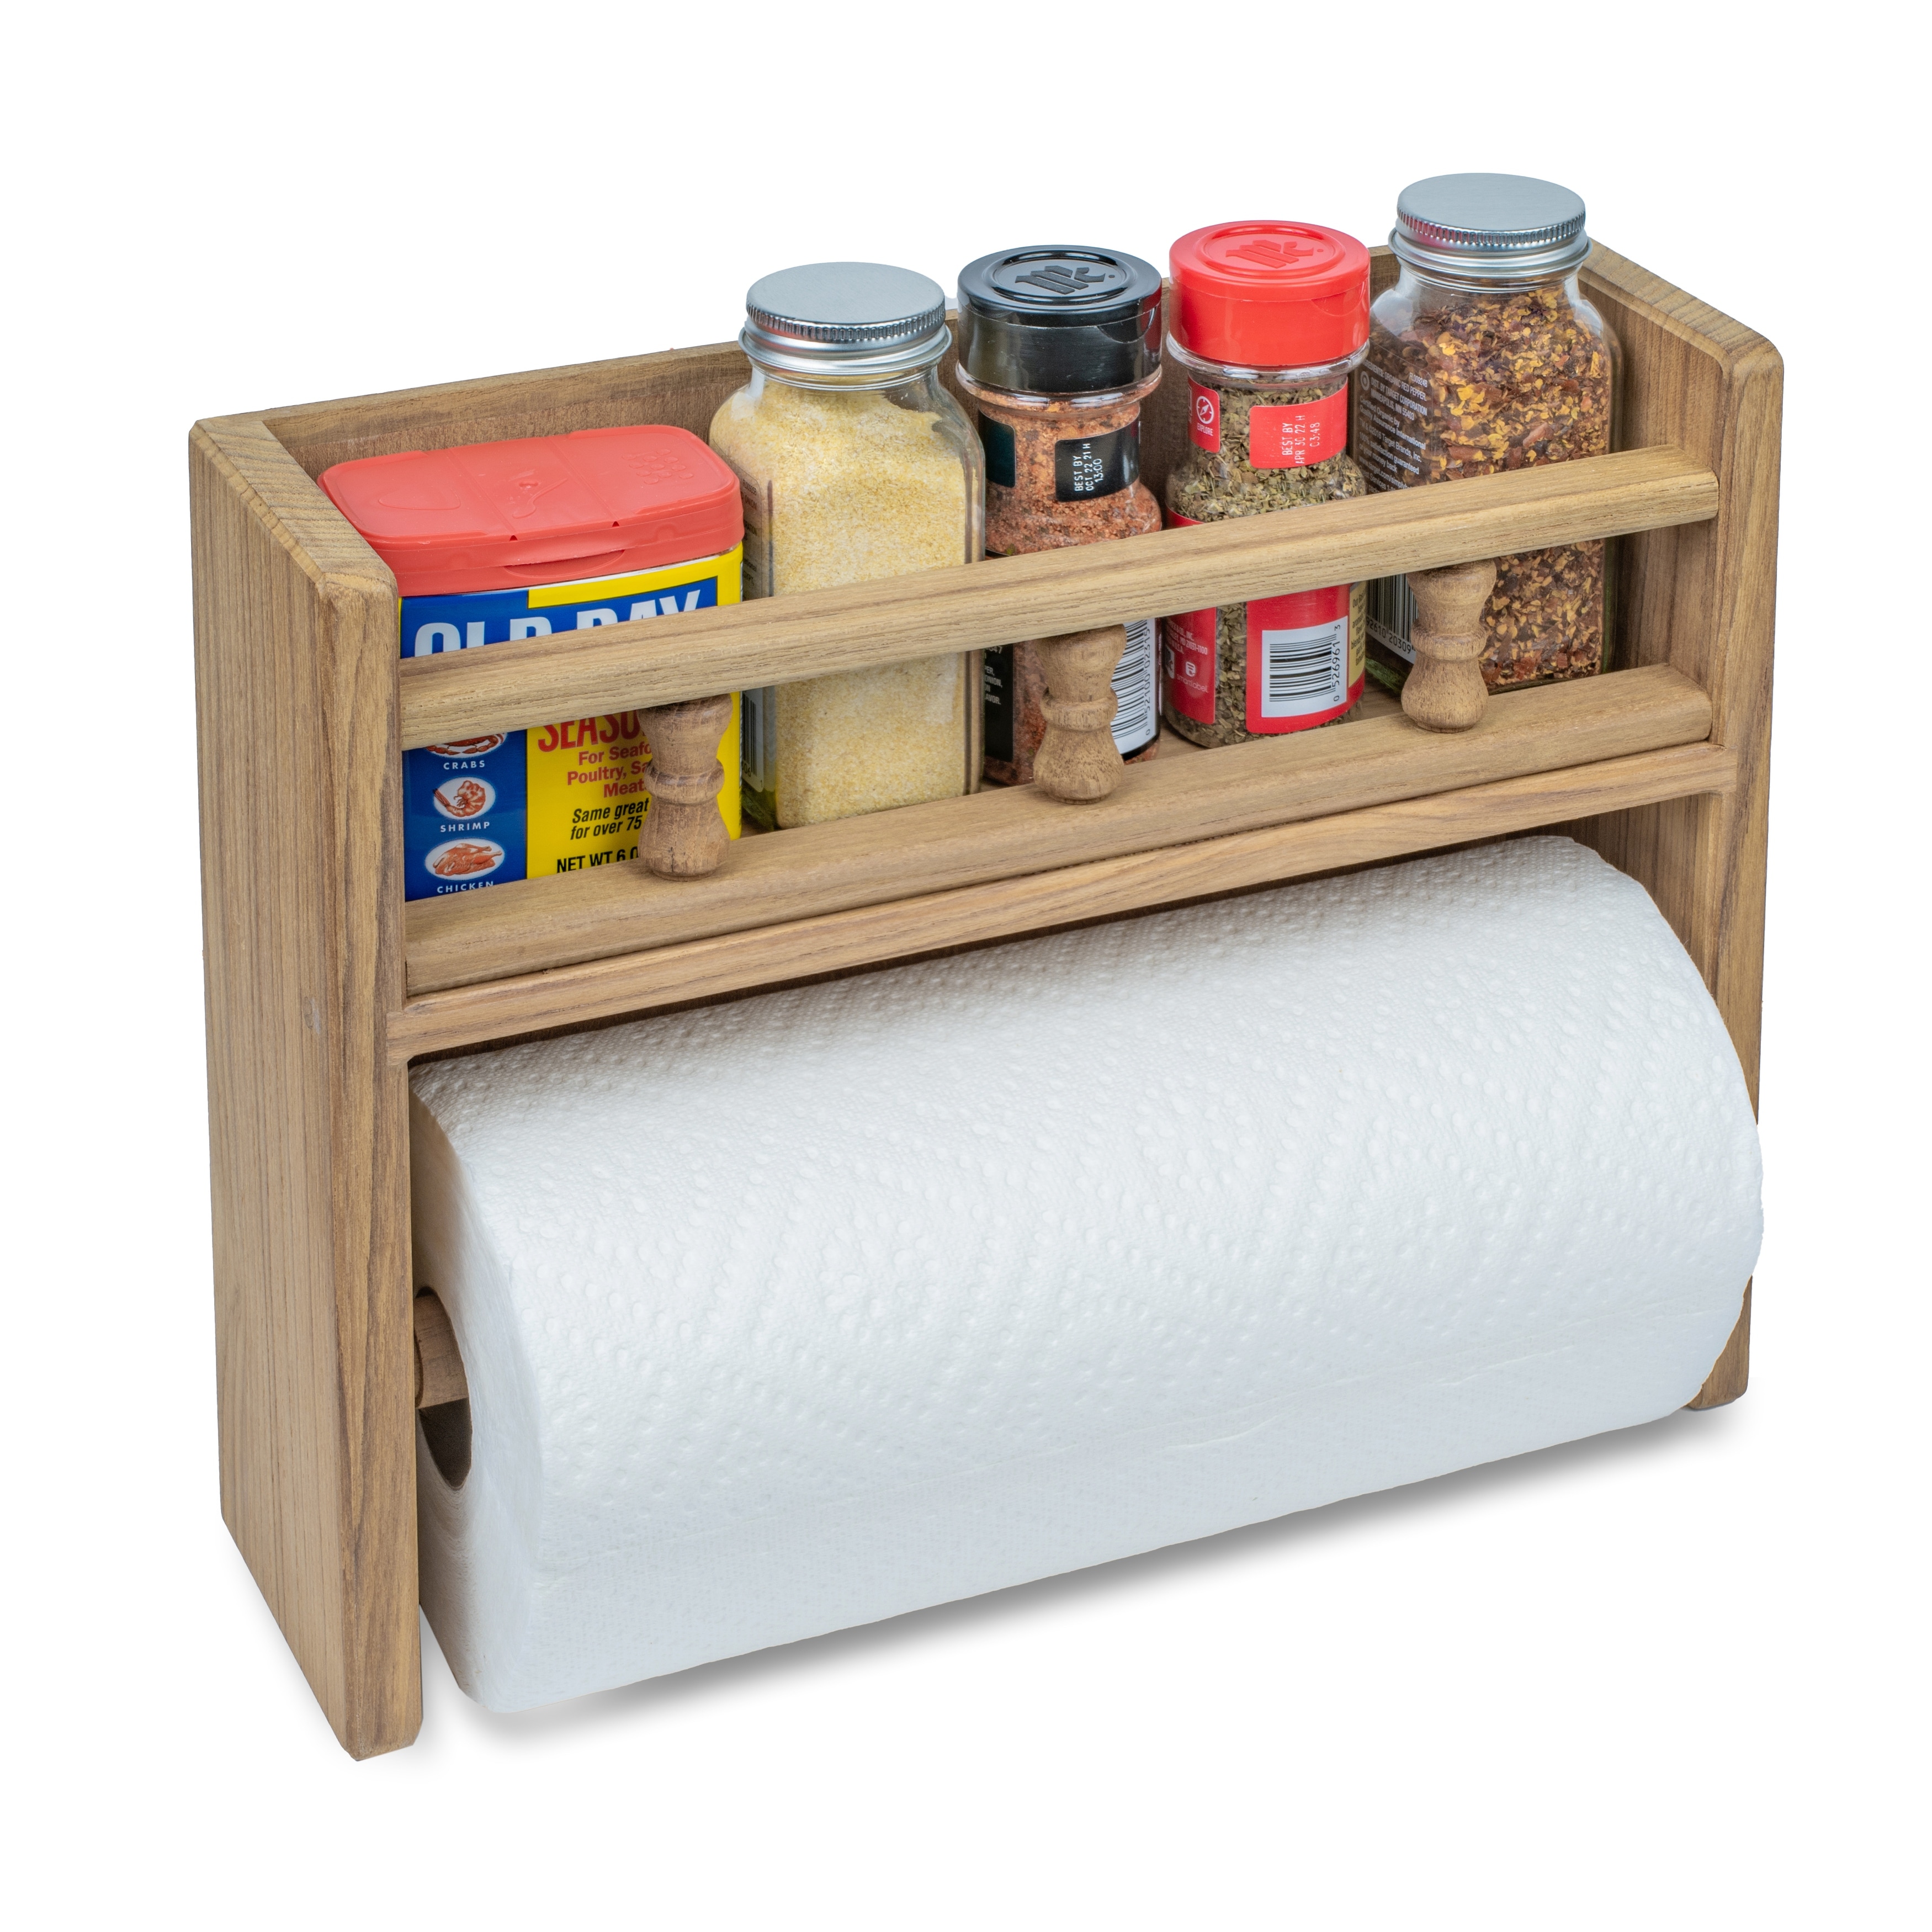 https://ak1.ostkcdn.com/images/products/is/images/direct/32360f94d86103f4b1dd291ee64e9ce5d37d5112/Teak-Spice-Rack-with-Paper-Towel-Holder.jpg